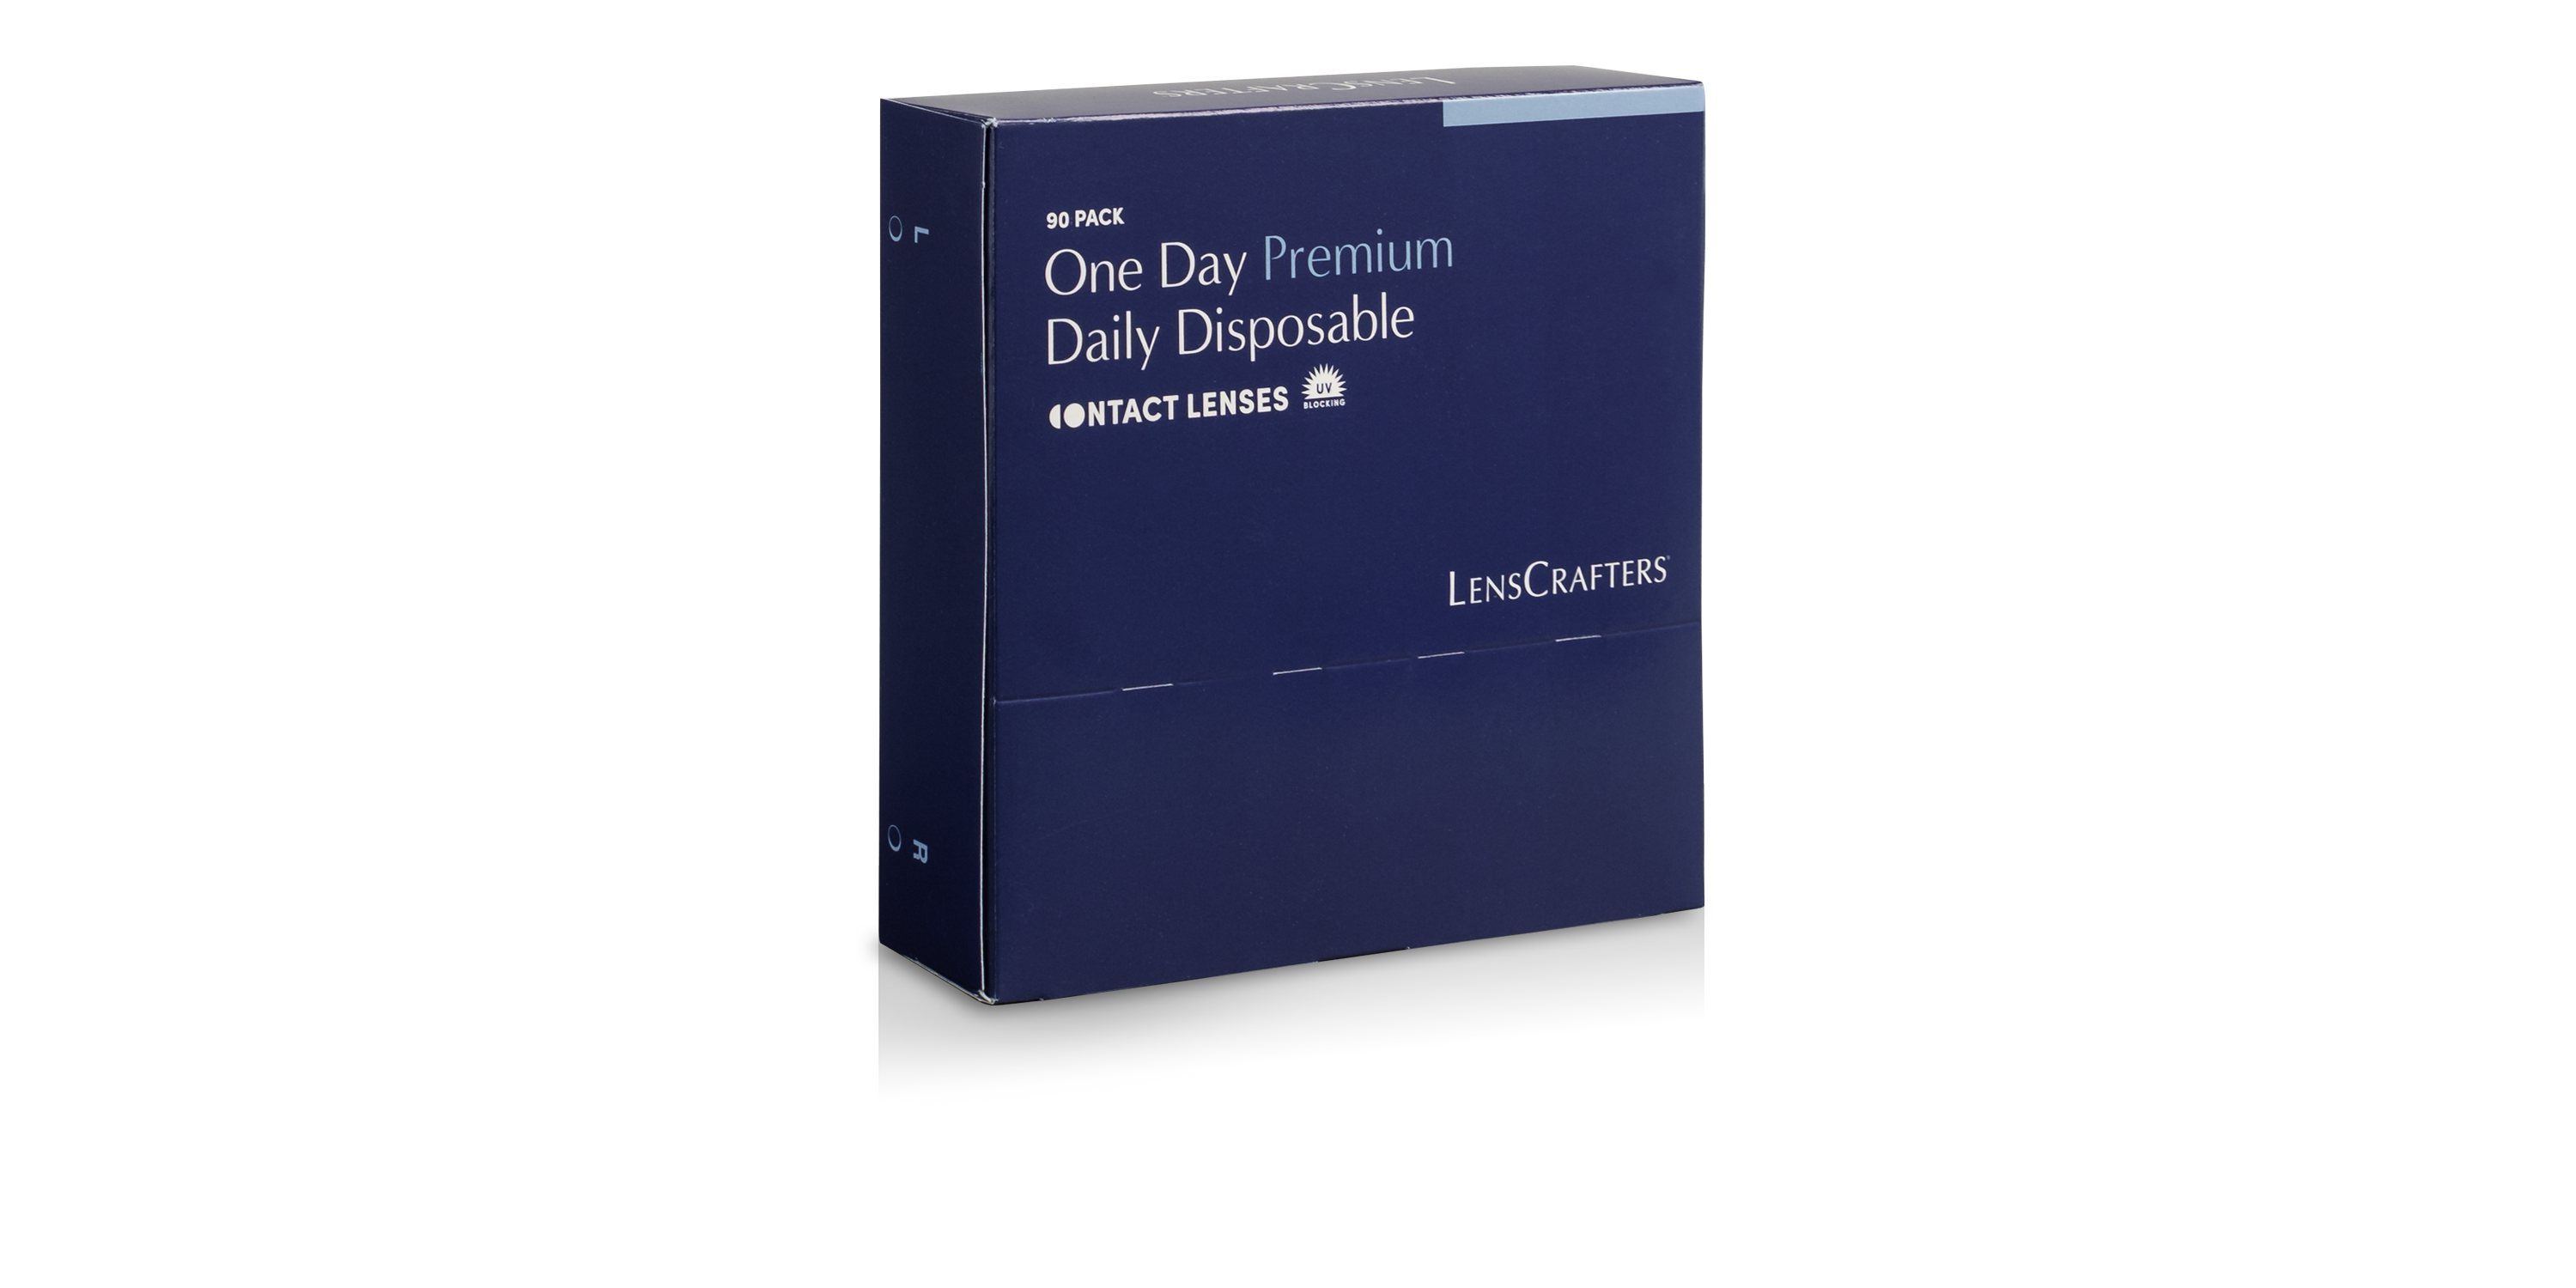 LensCrafters 1-Day Premium 90 Contact Lenses